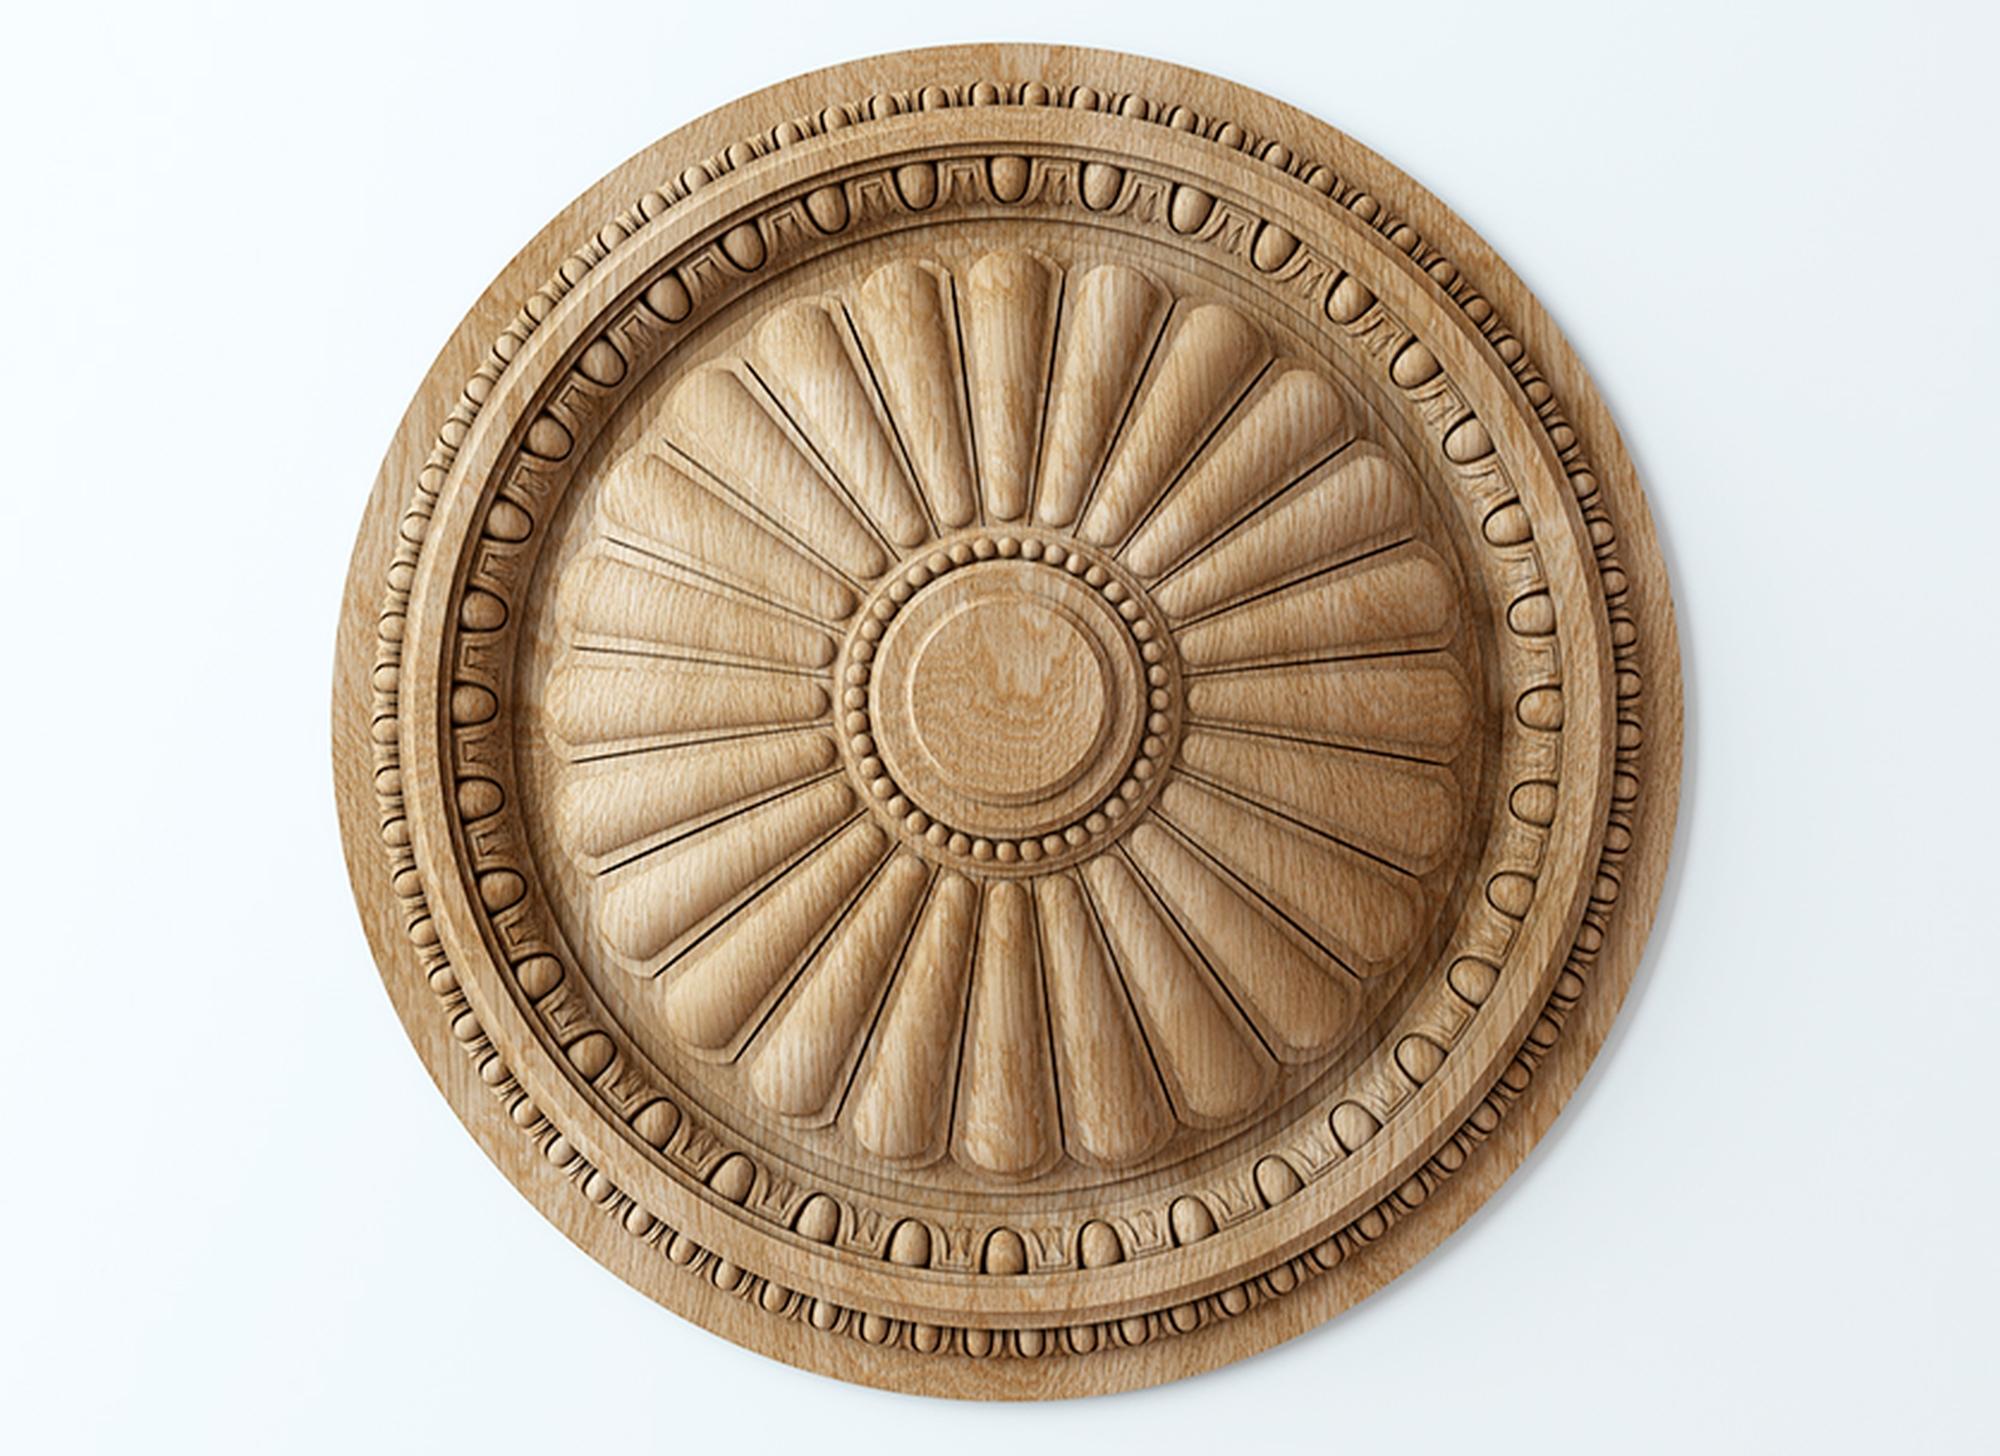 High-quality hand carved wood rosettes from oak or beech of your choice.

>> SKU: R-023

>> Dimensions (A x B x C):

1) 15.75